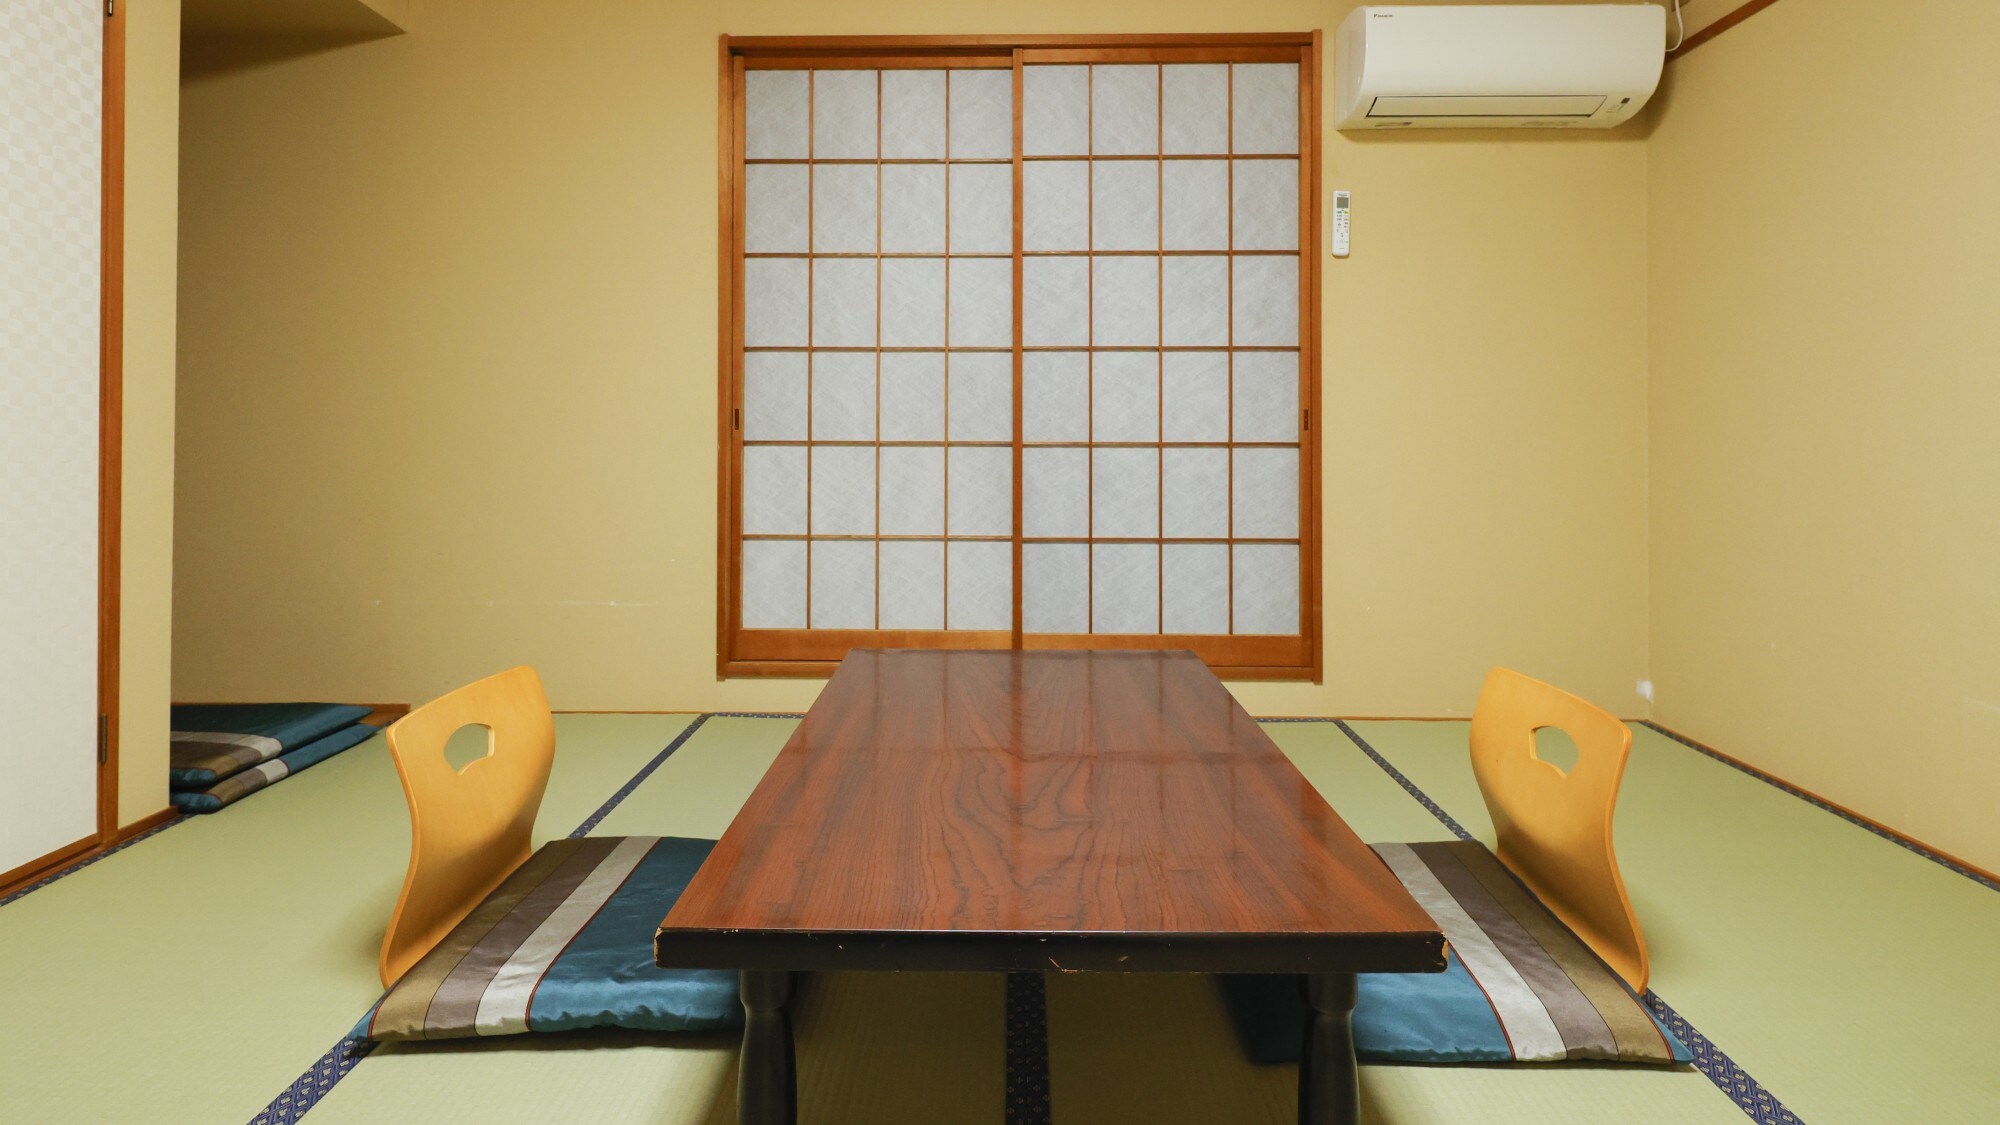 Old-fashioned relaxing Japanese-style room (new tatami mat)